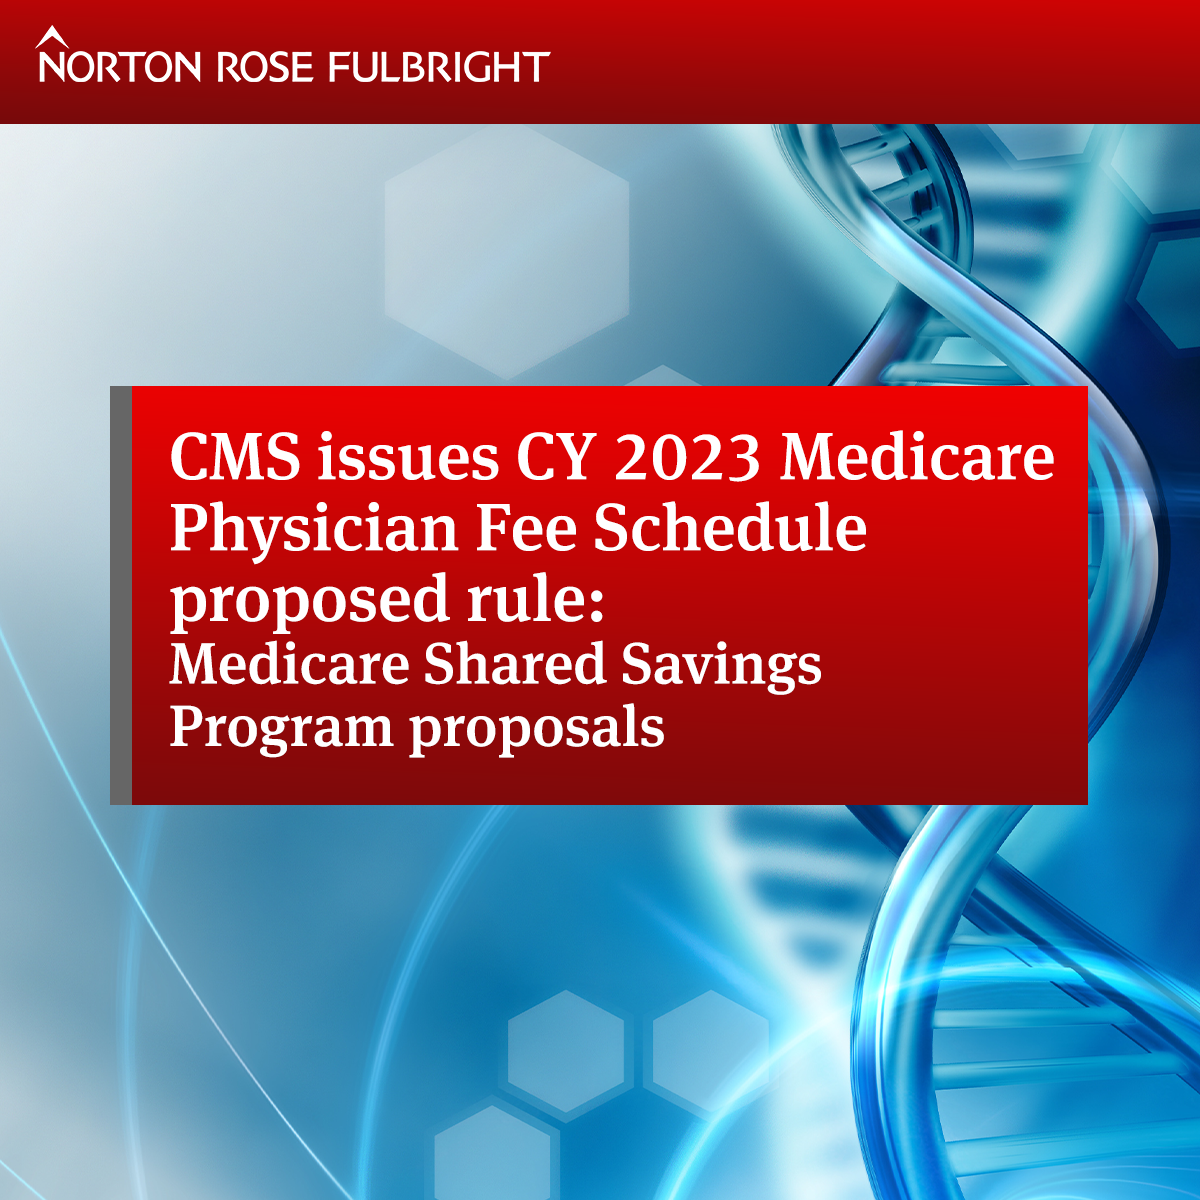 CMS issues calendar year (CY) 2023 Medicare Physician Fee Schedule